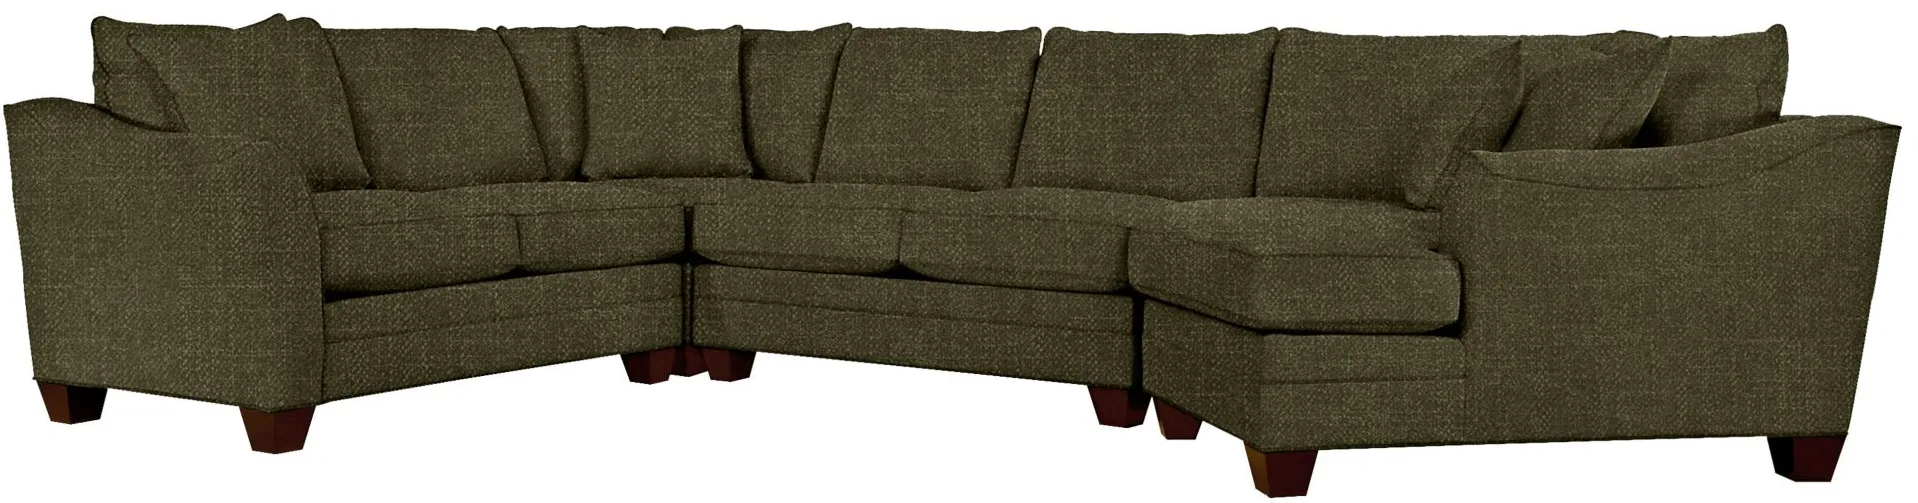 Foresthill 4-pc. Right Hand Cuddler with Loveseat Sectional Sofa in Elliot Avocado by H.M. Richards